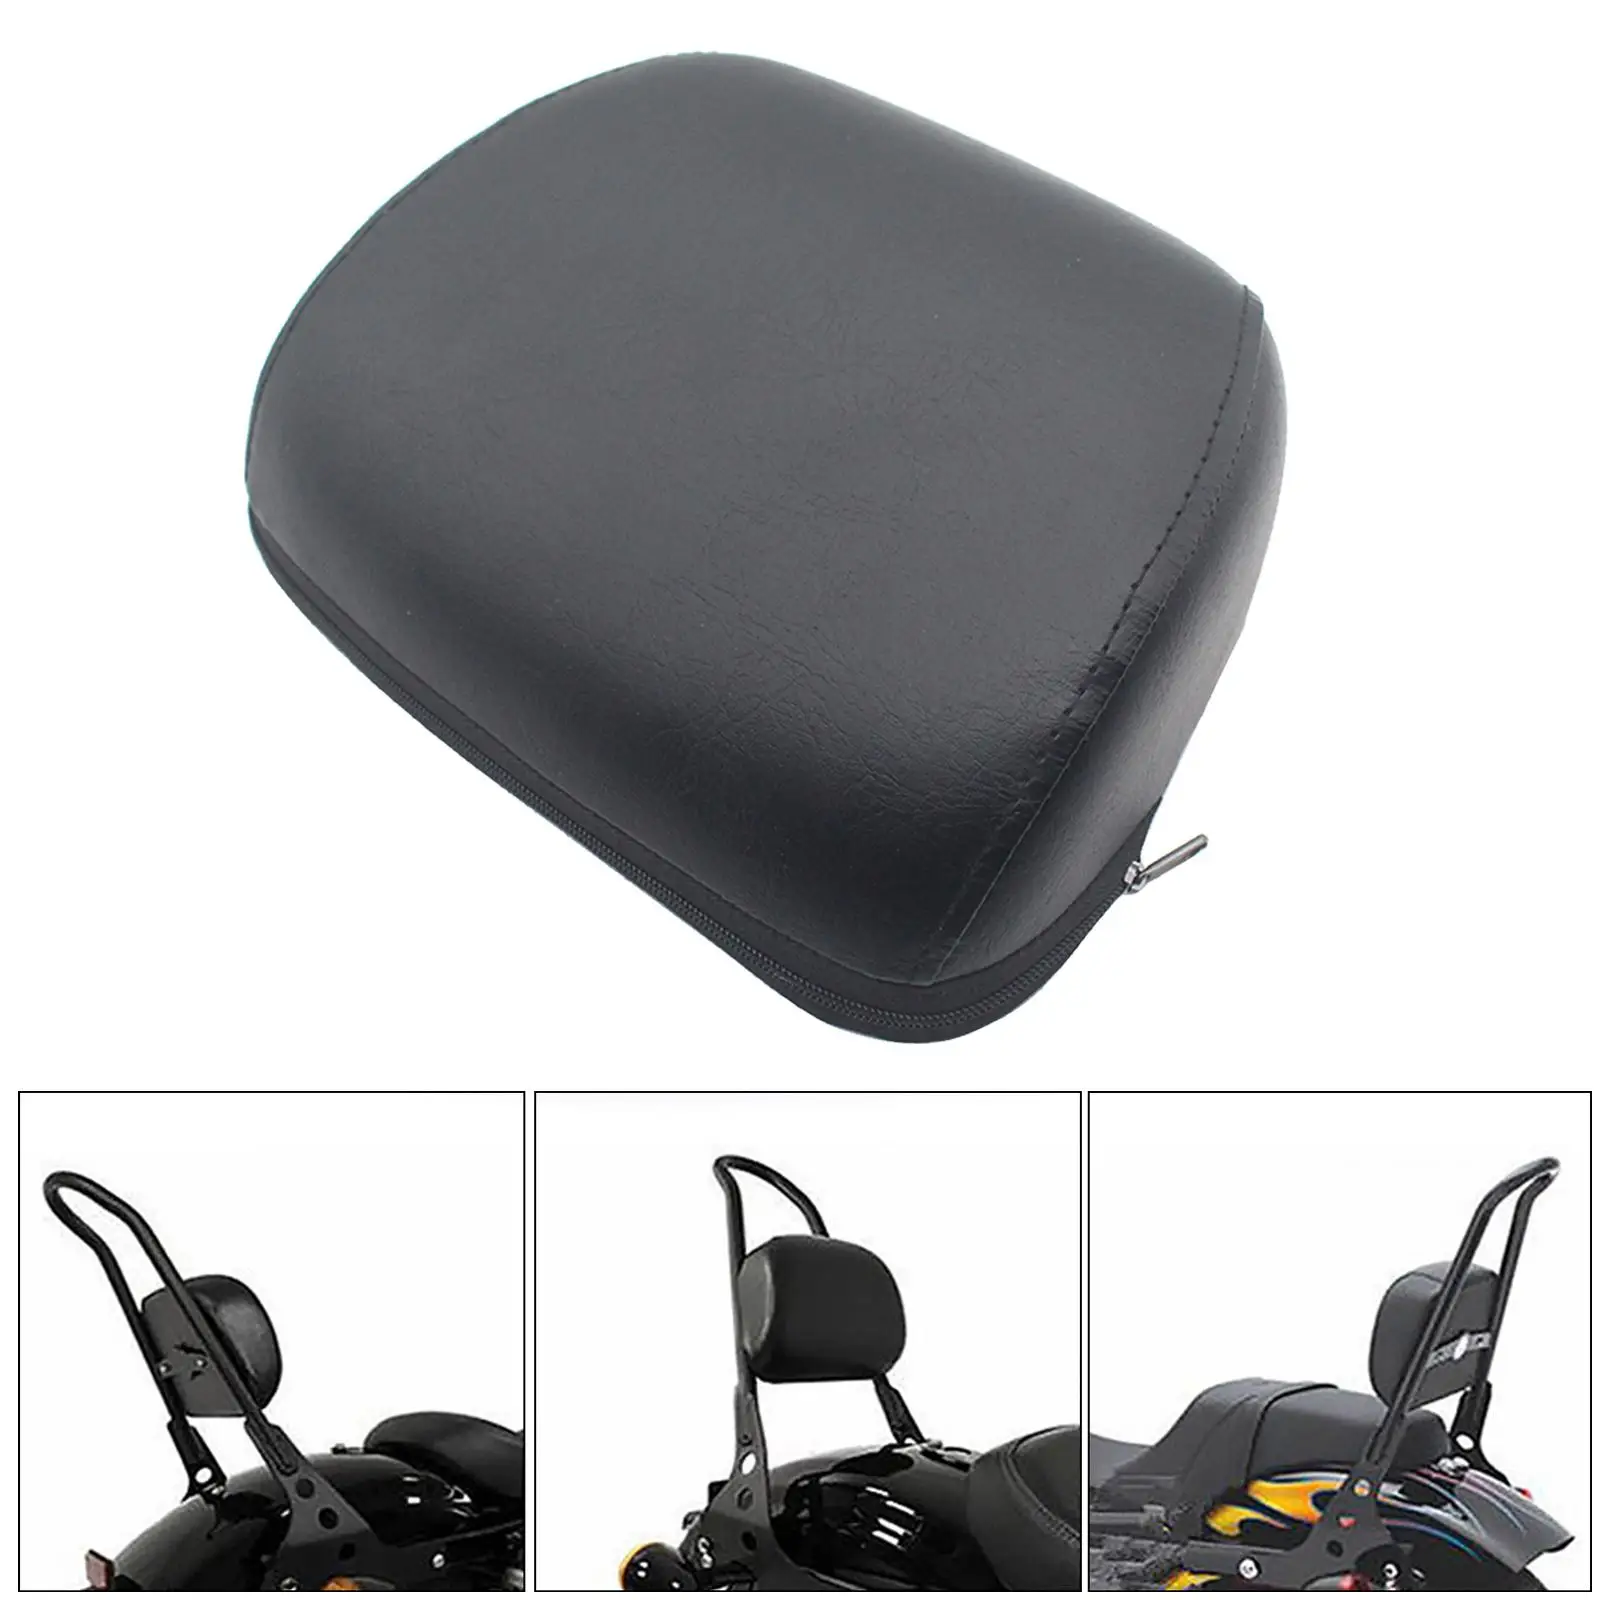 Backrest Pad Universal Passenger for 883 1200 48 Motorcycle Parts